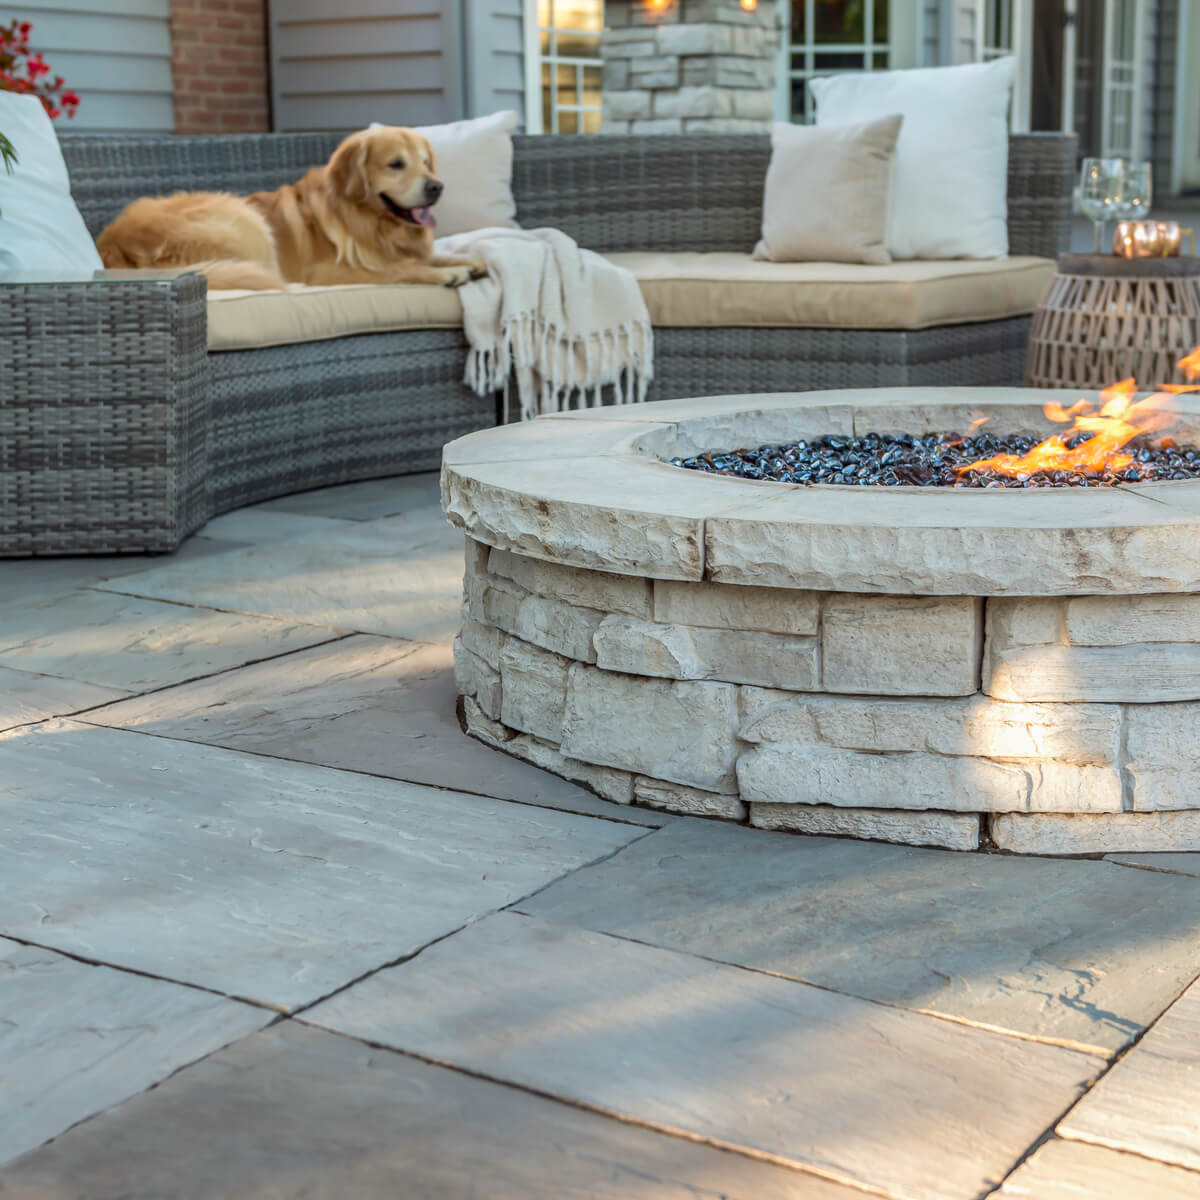 Dog Lounging on Outdoor Patio Couch by Circular Unilock Fire Pit